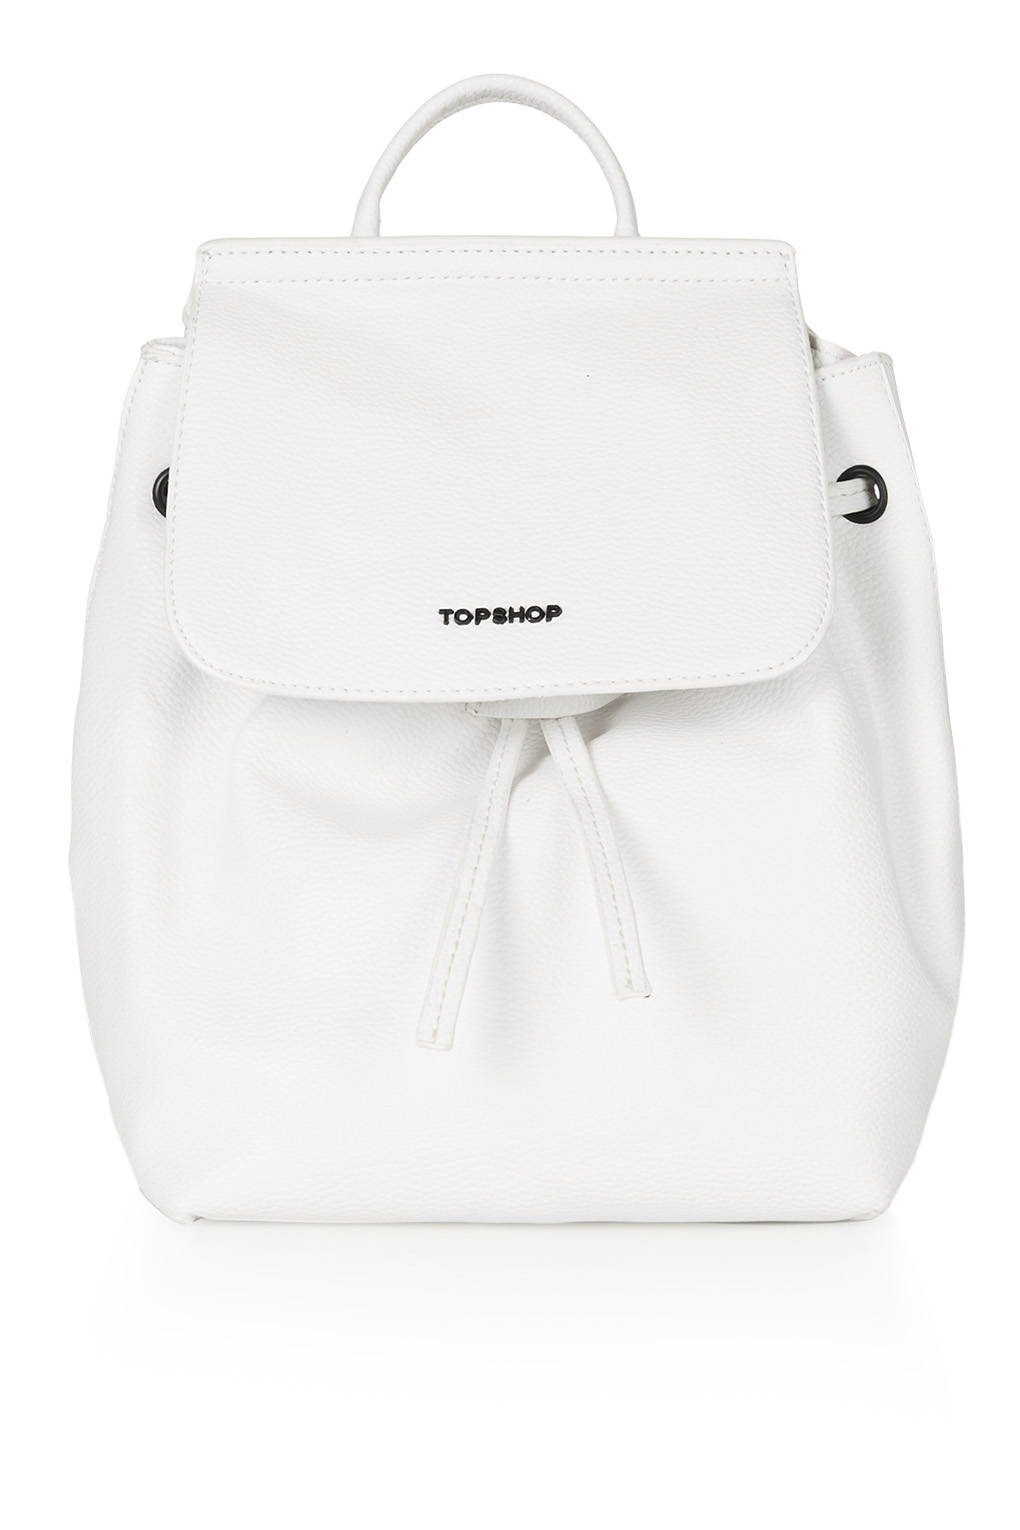 Topshop Mini Textured Backpack in White | Lyst